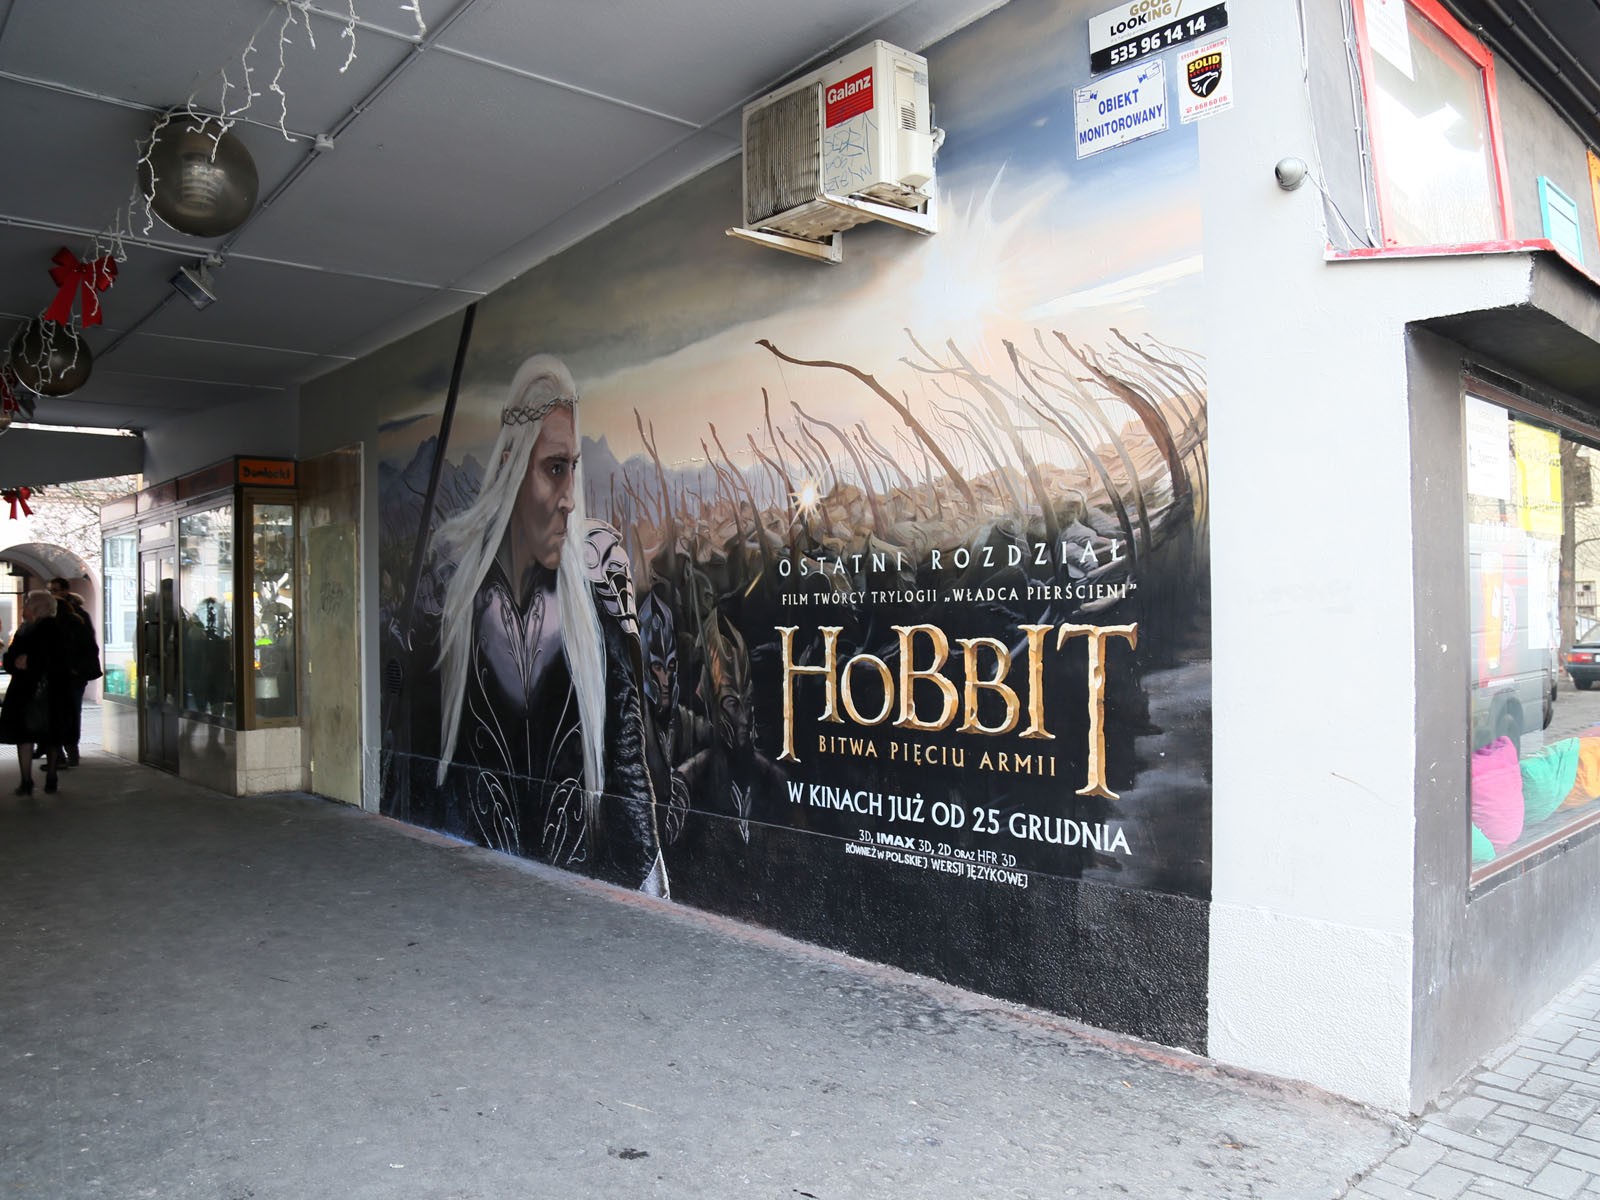 Warsaw Downtown pavilions Nowy Swiat street painted advertisement The Hobbit: The Battle of the Five Armies | The Hobbit: The Battle of the Five Armies | Portfolio